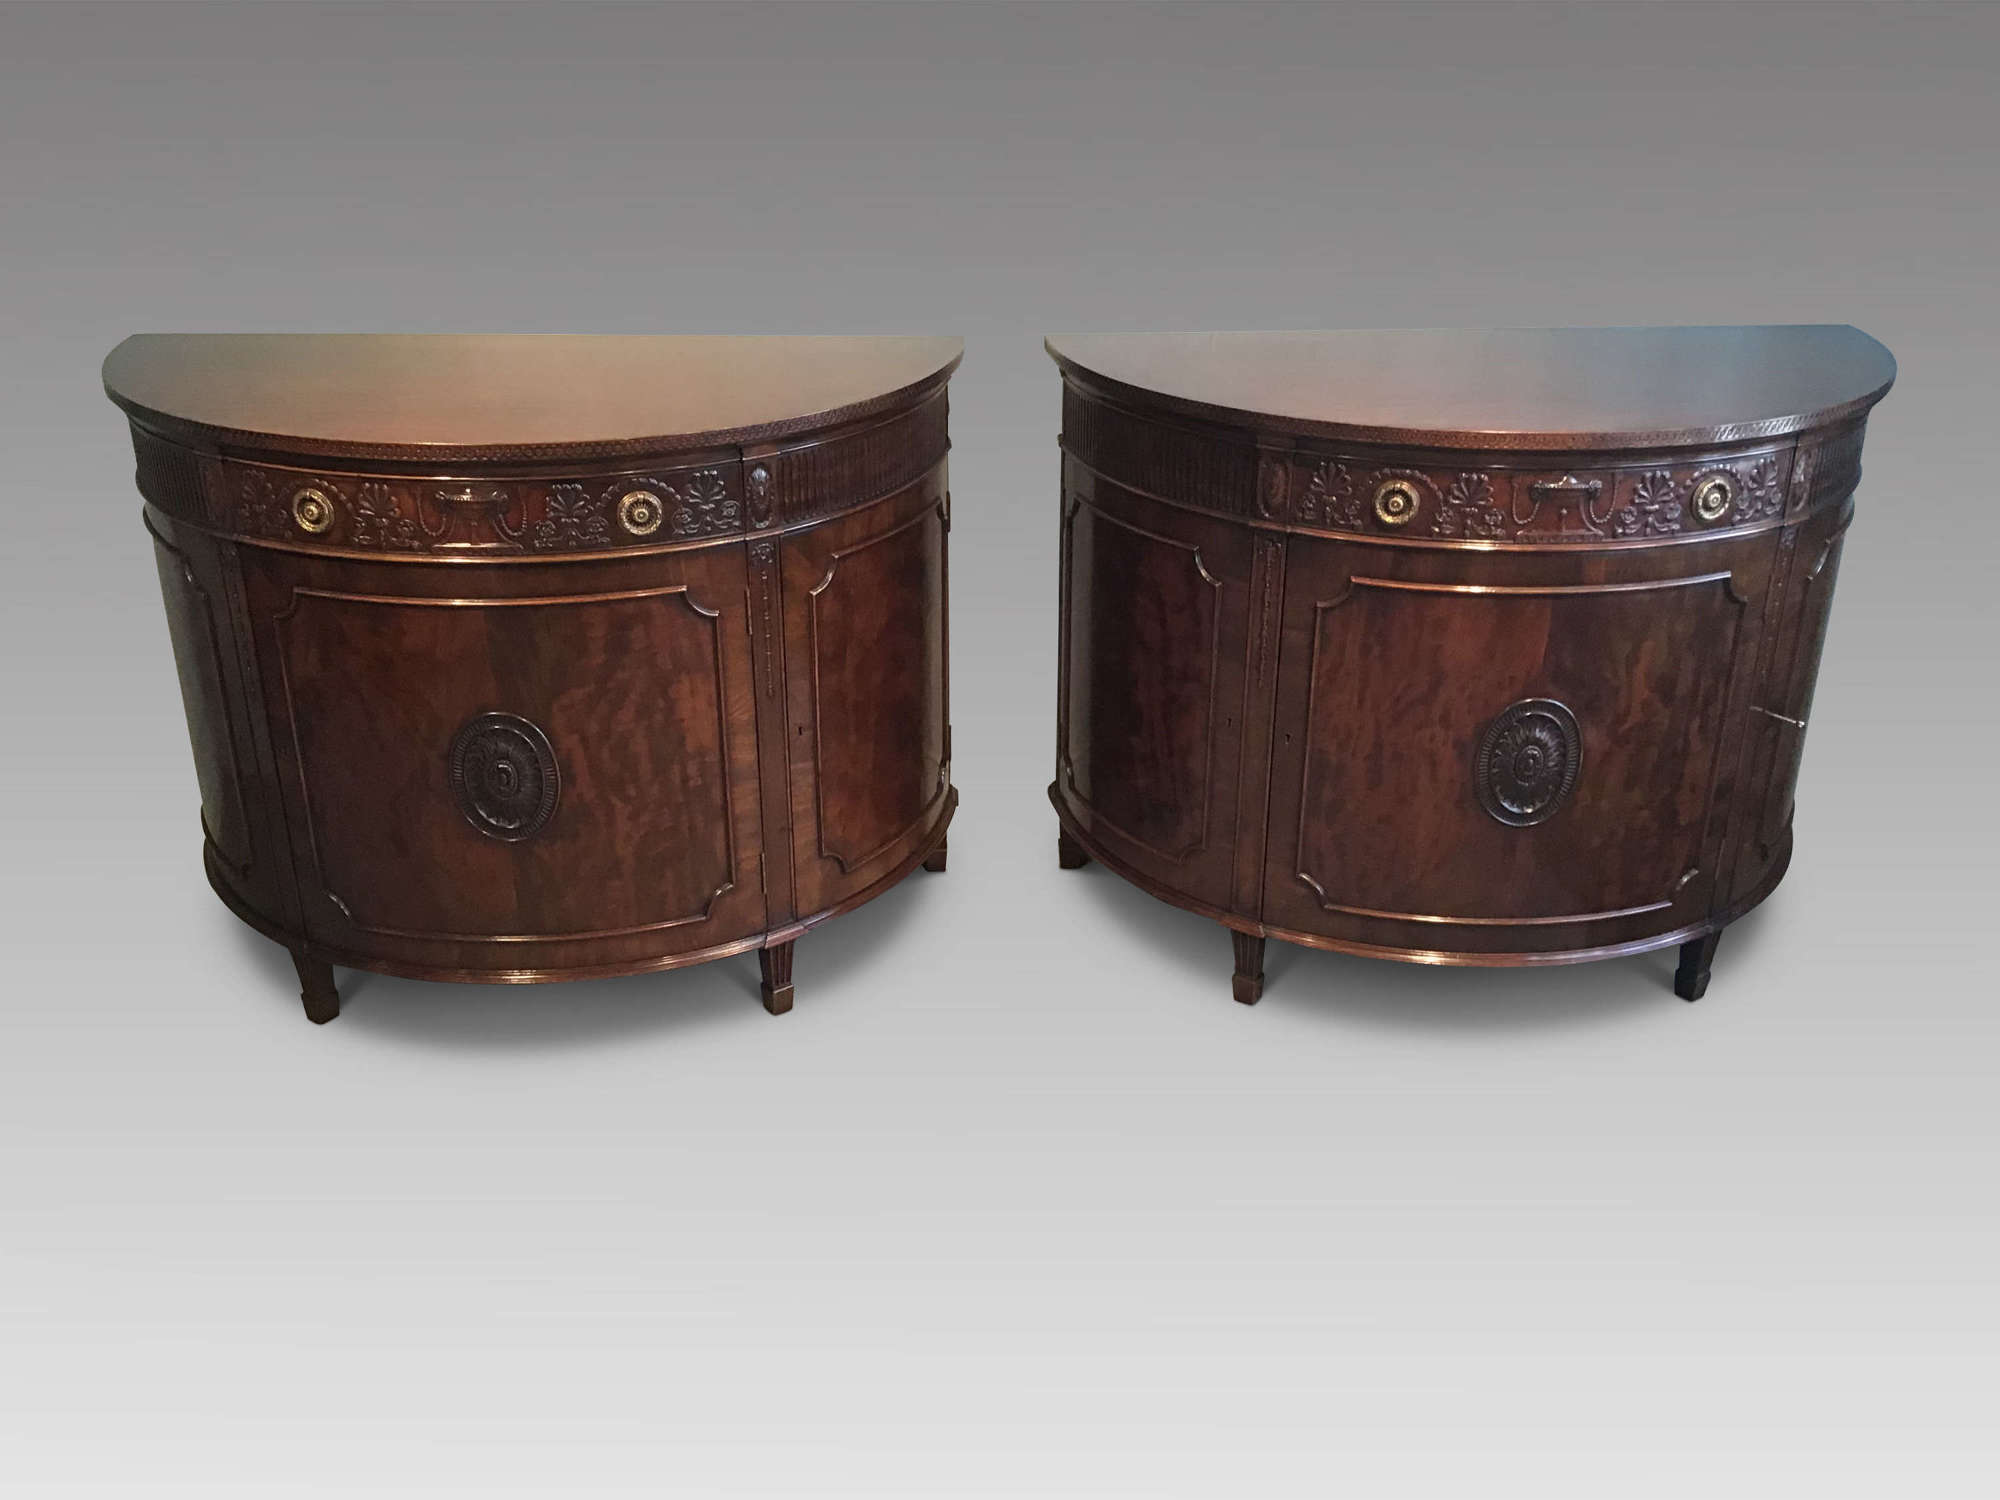 Pair of mahogany demi-lune commodes